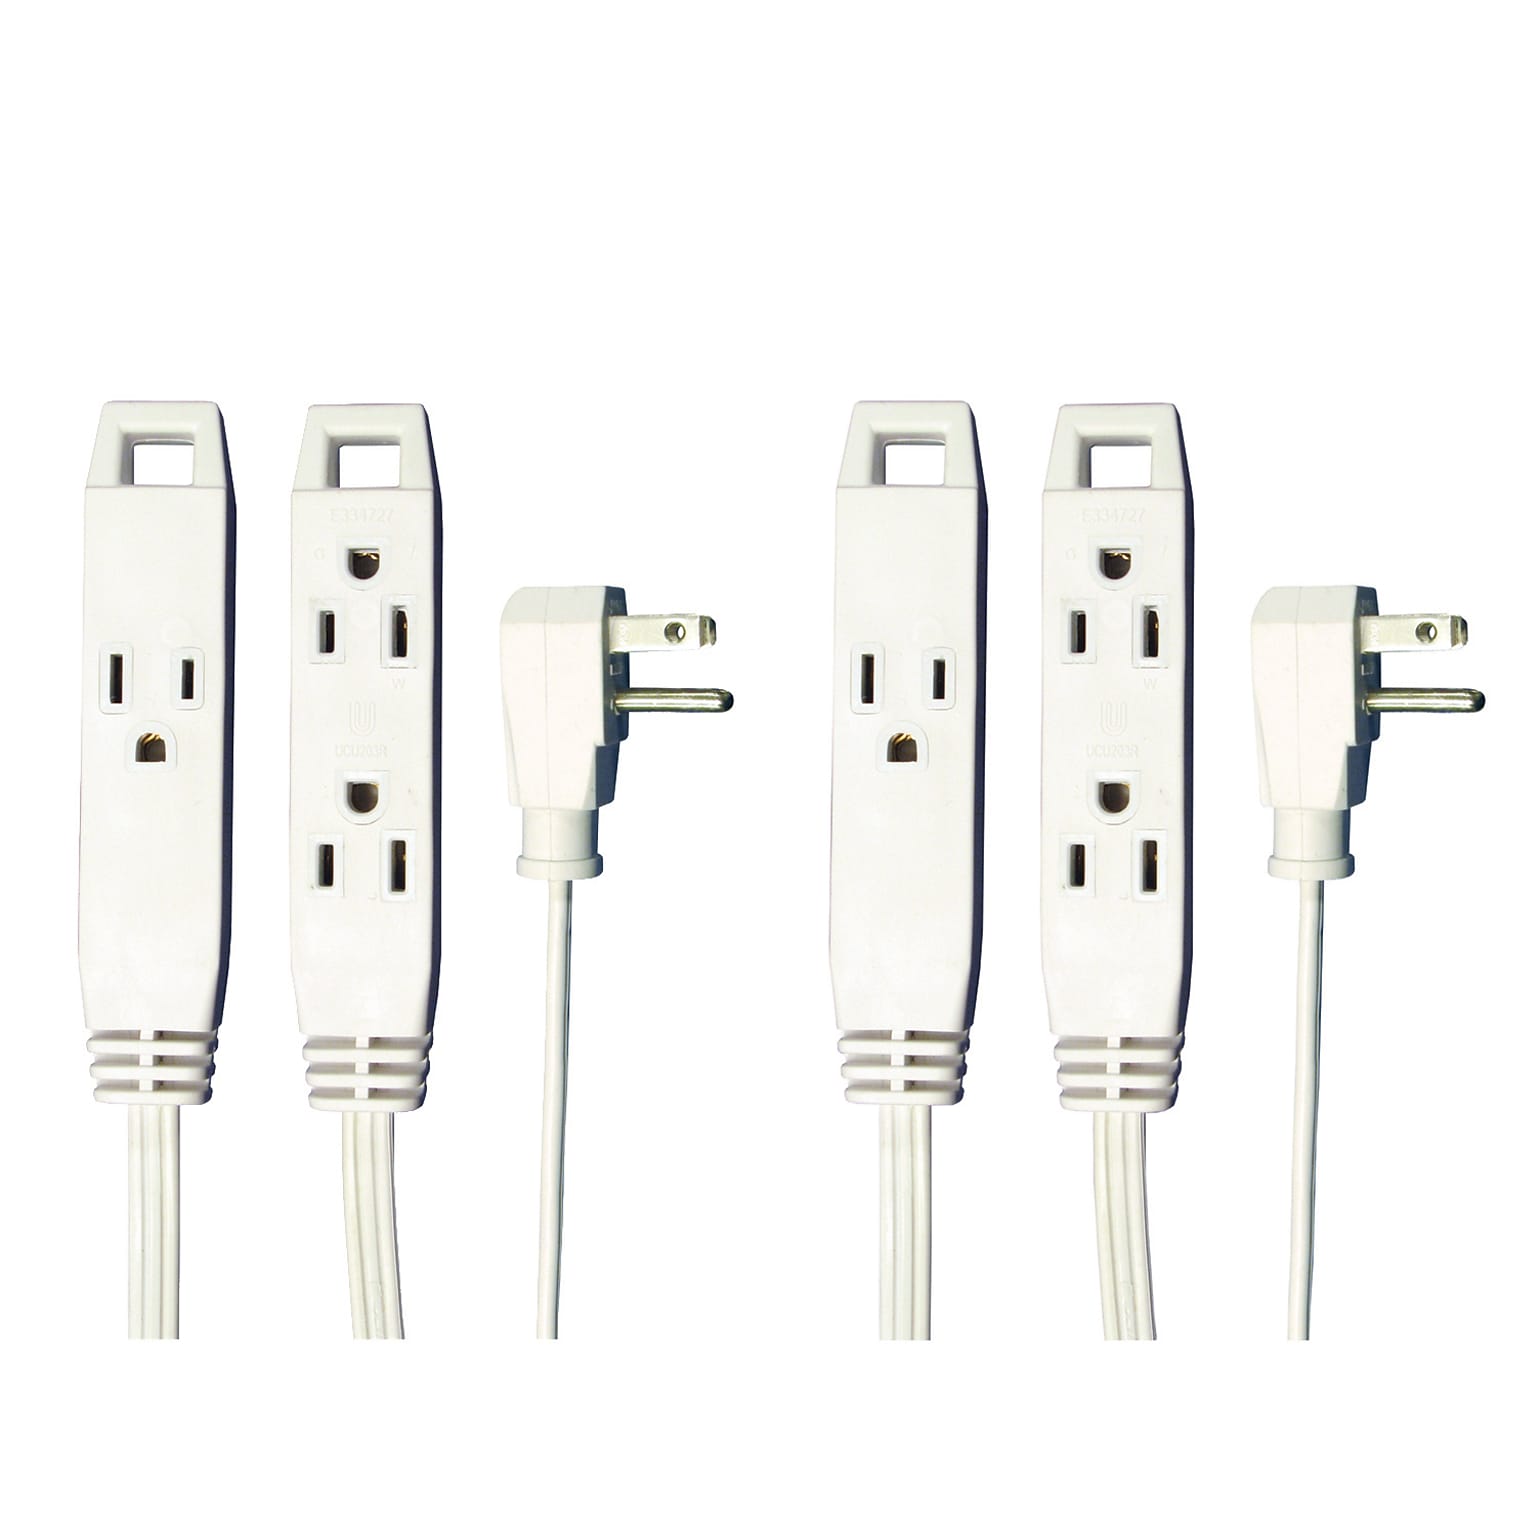 Axis 8 Extension Cord, 3-Outlet, White (KIT45505X2)